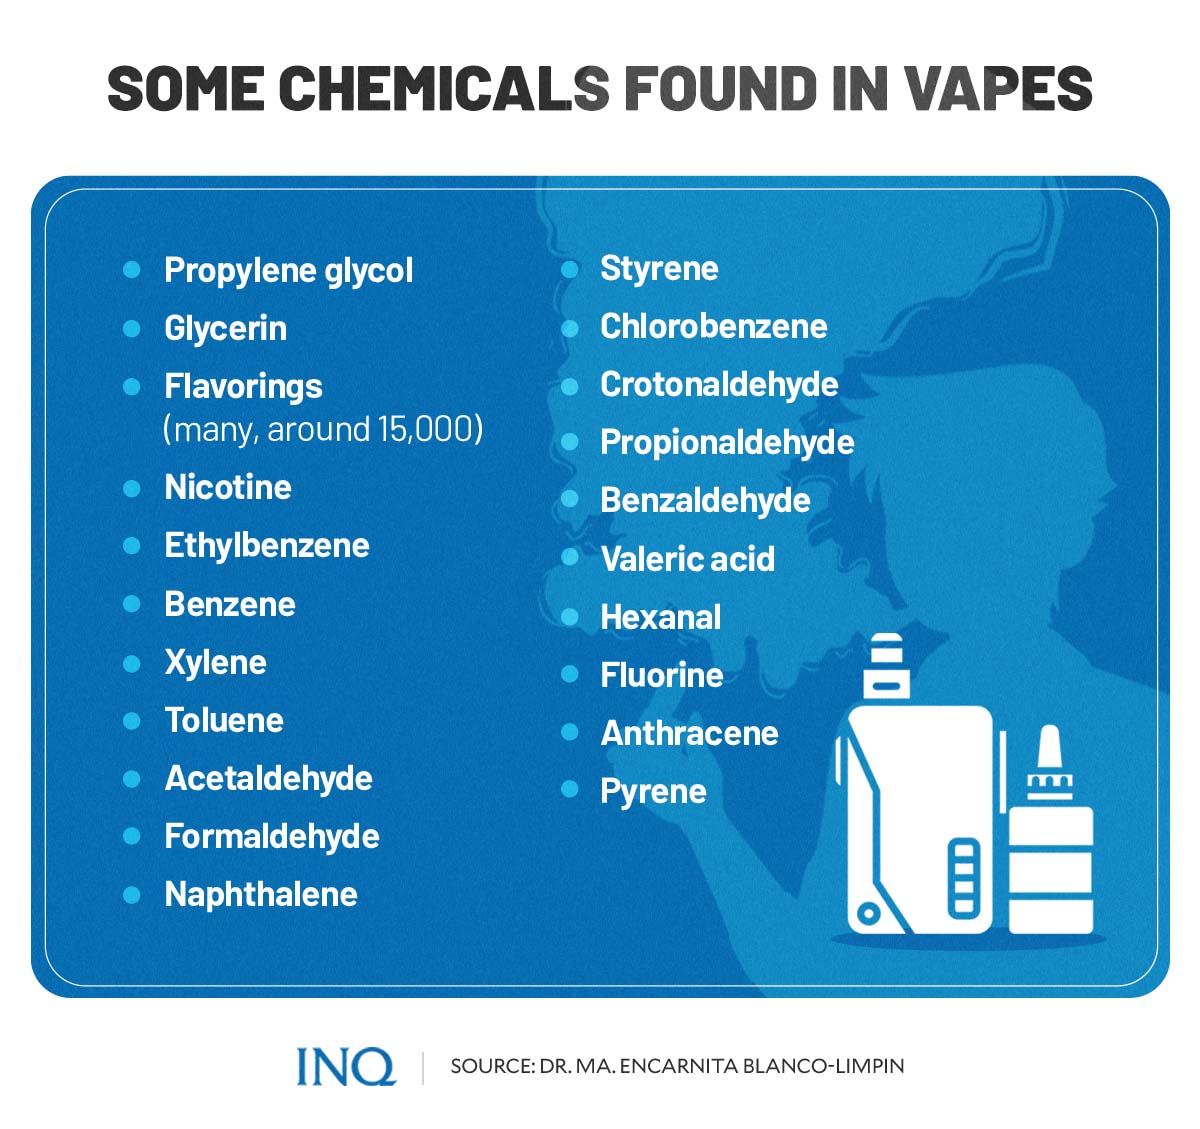 Some chemicals found in vapes